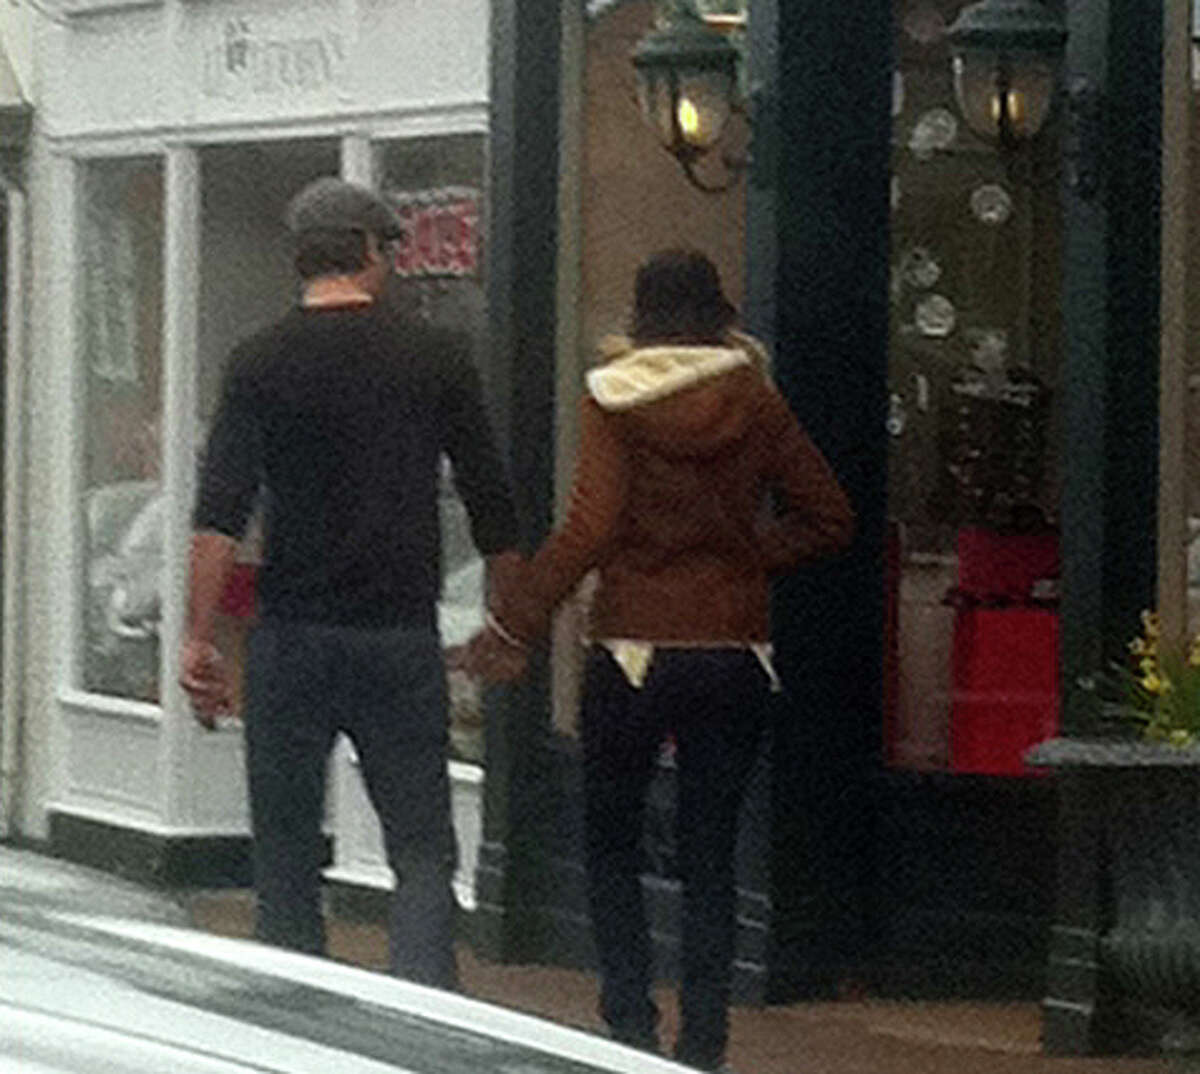 Actors Ryan Reynolds and Blake Lively were spotted walking down Elm Street in New Canaan Thursday afternoon.